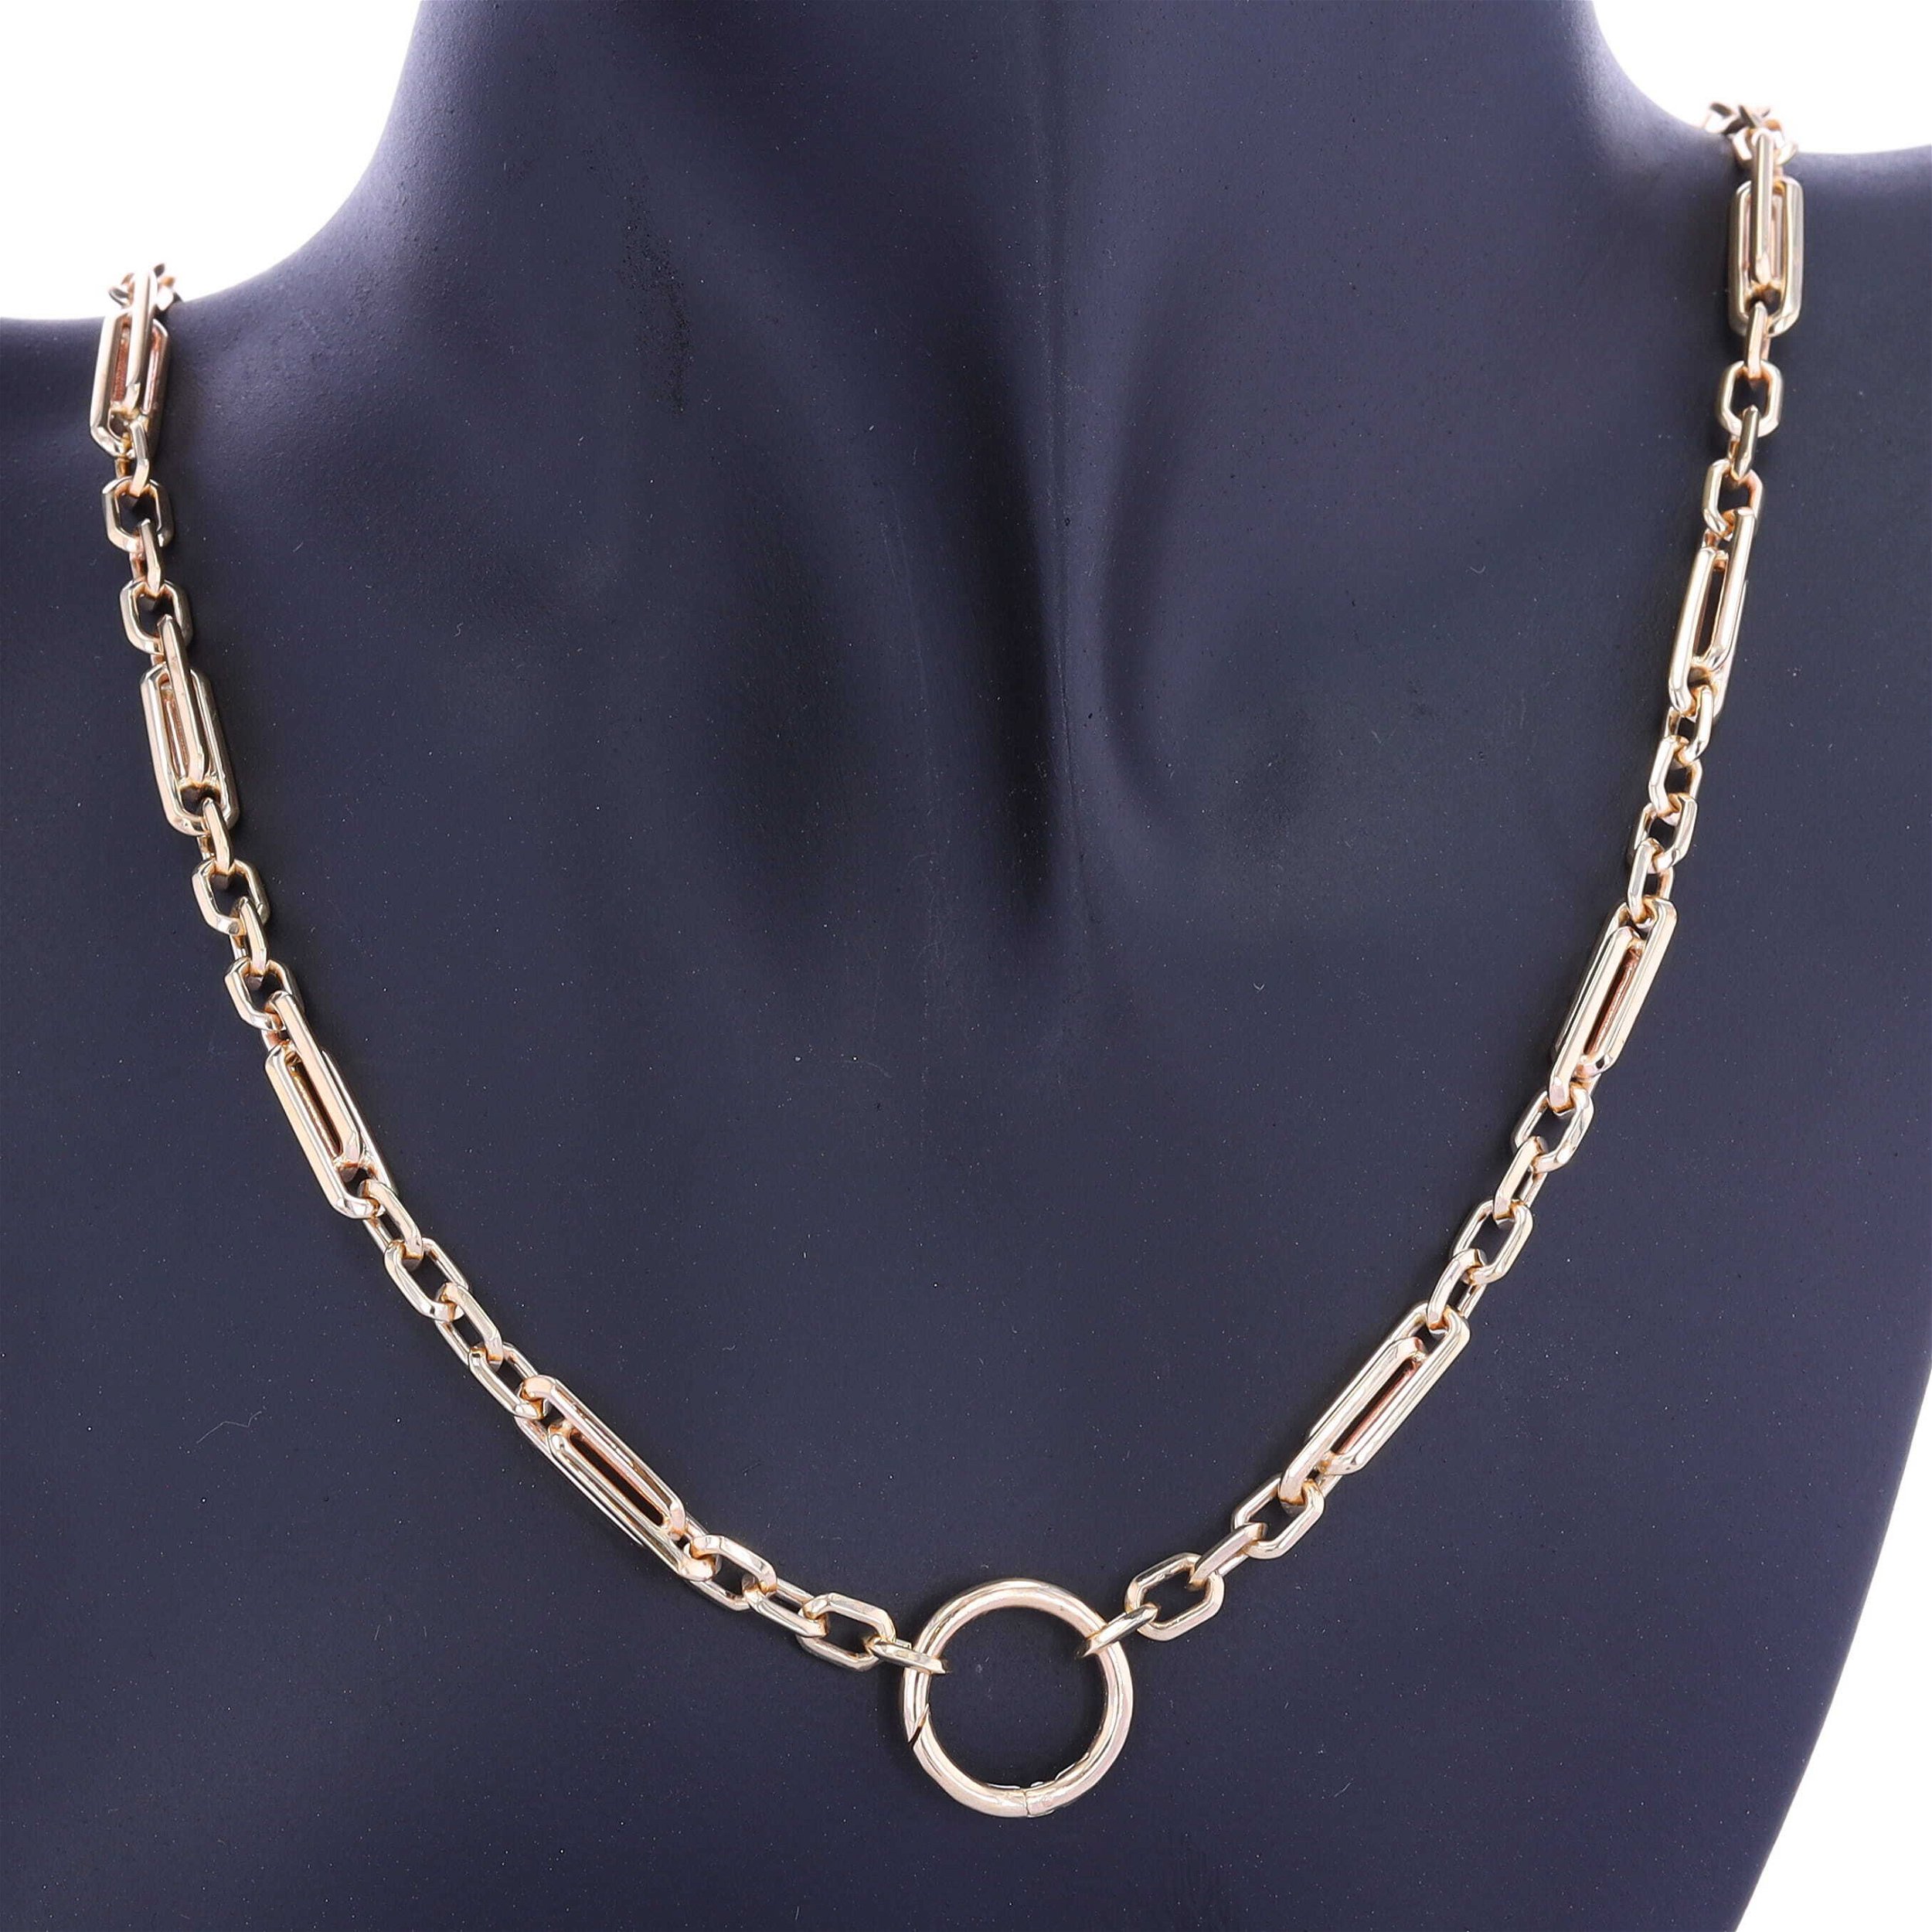 14k Vintage Look Watch Fob Chain with Openable Circle Bale